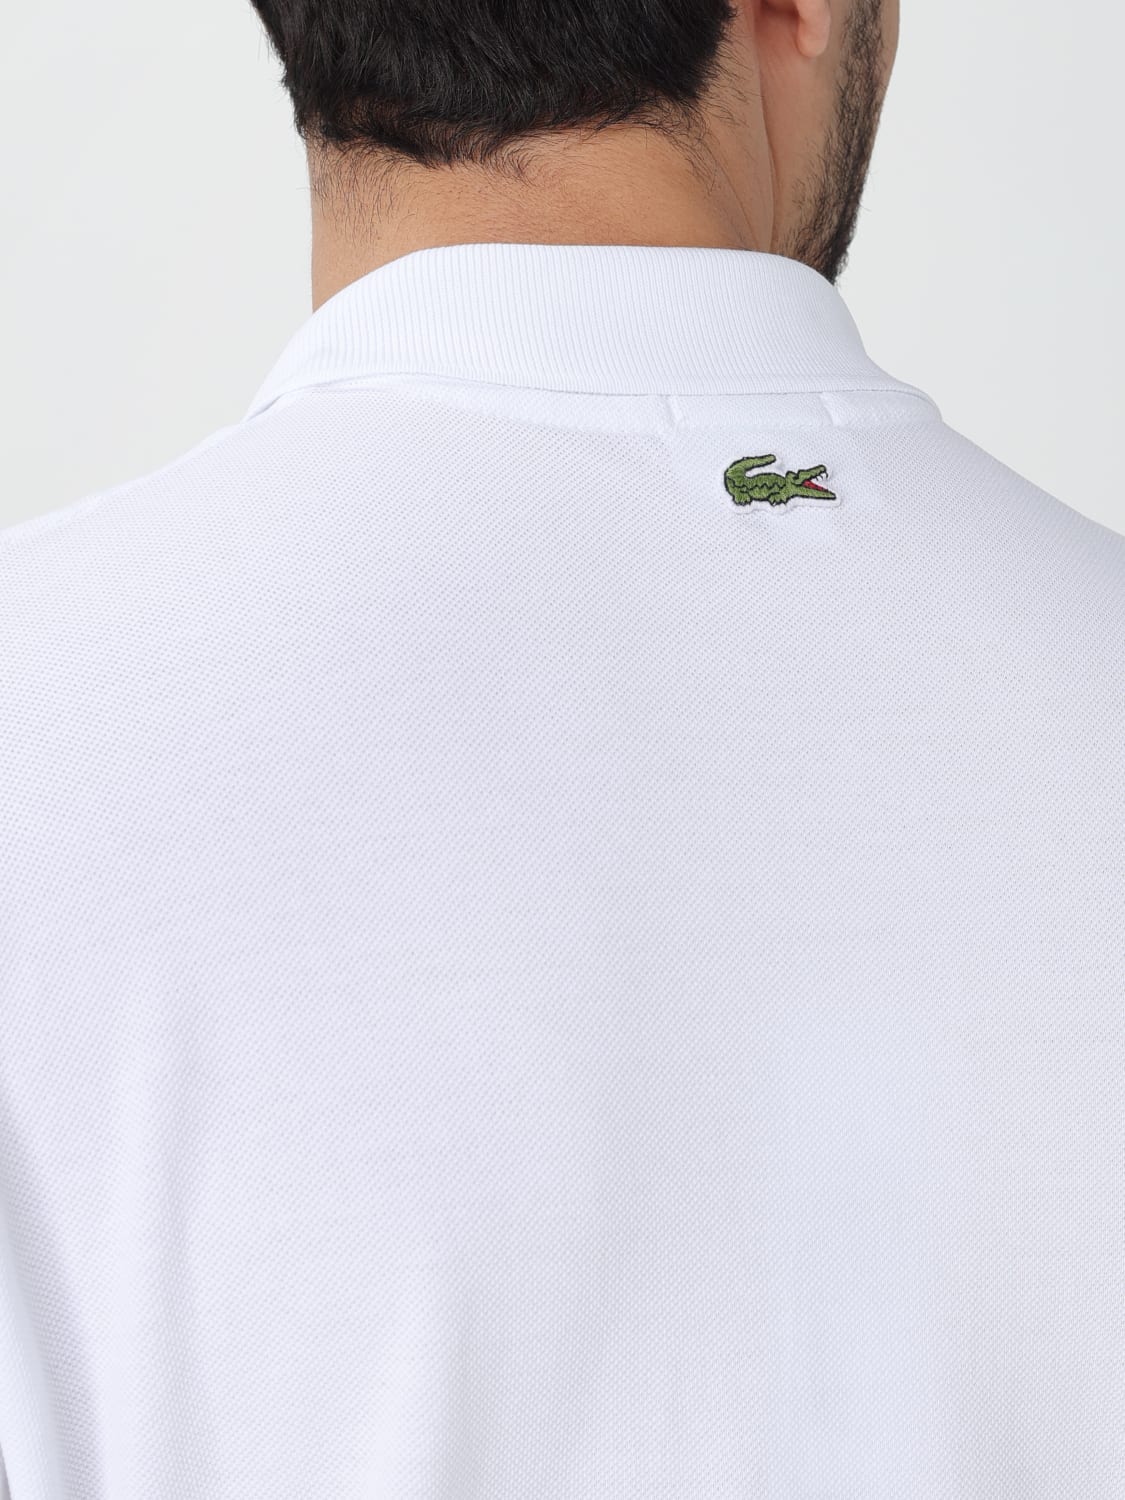 Mens Clothing Lacoste, Style code: ph3922-001